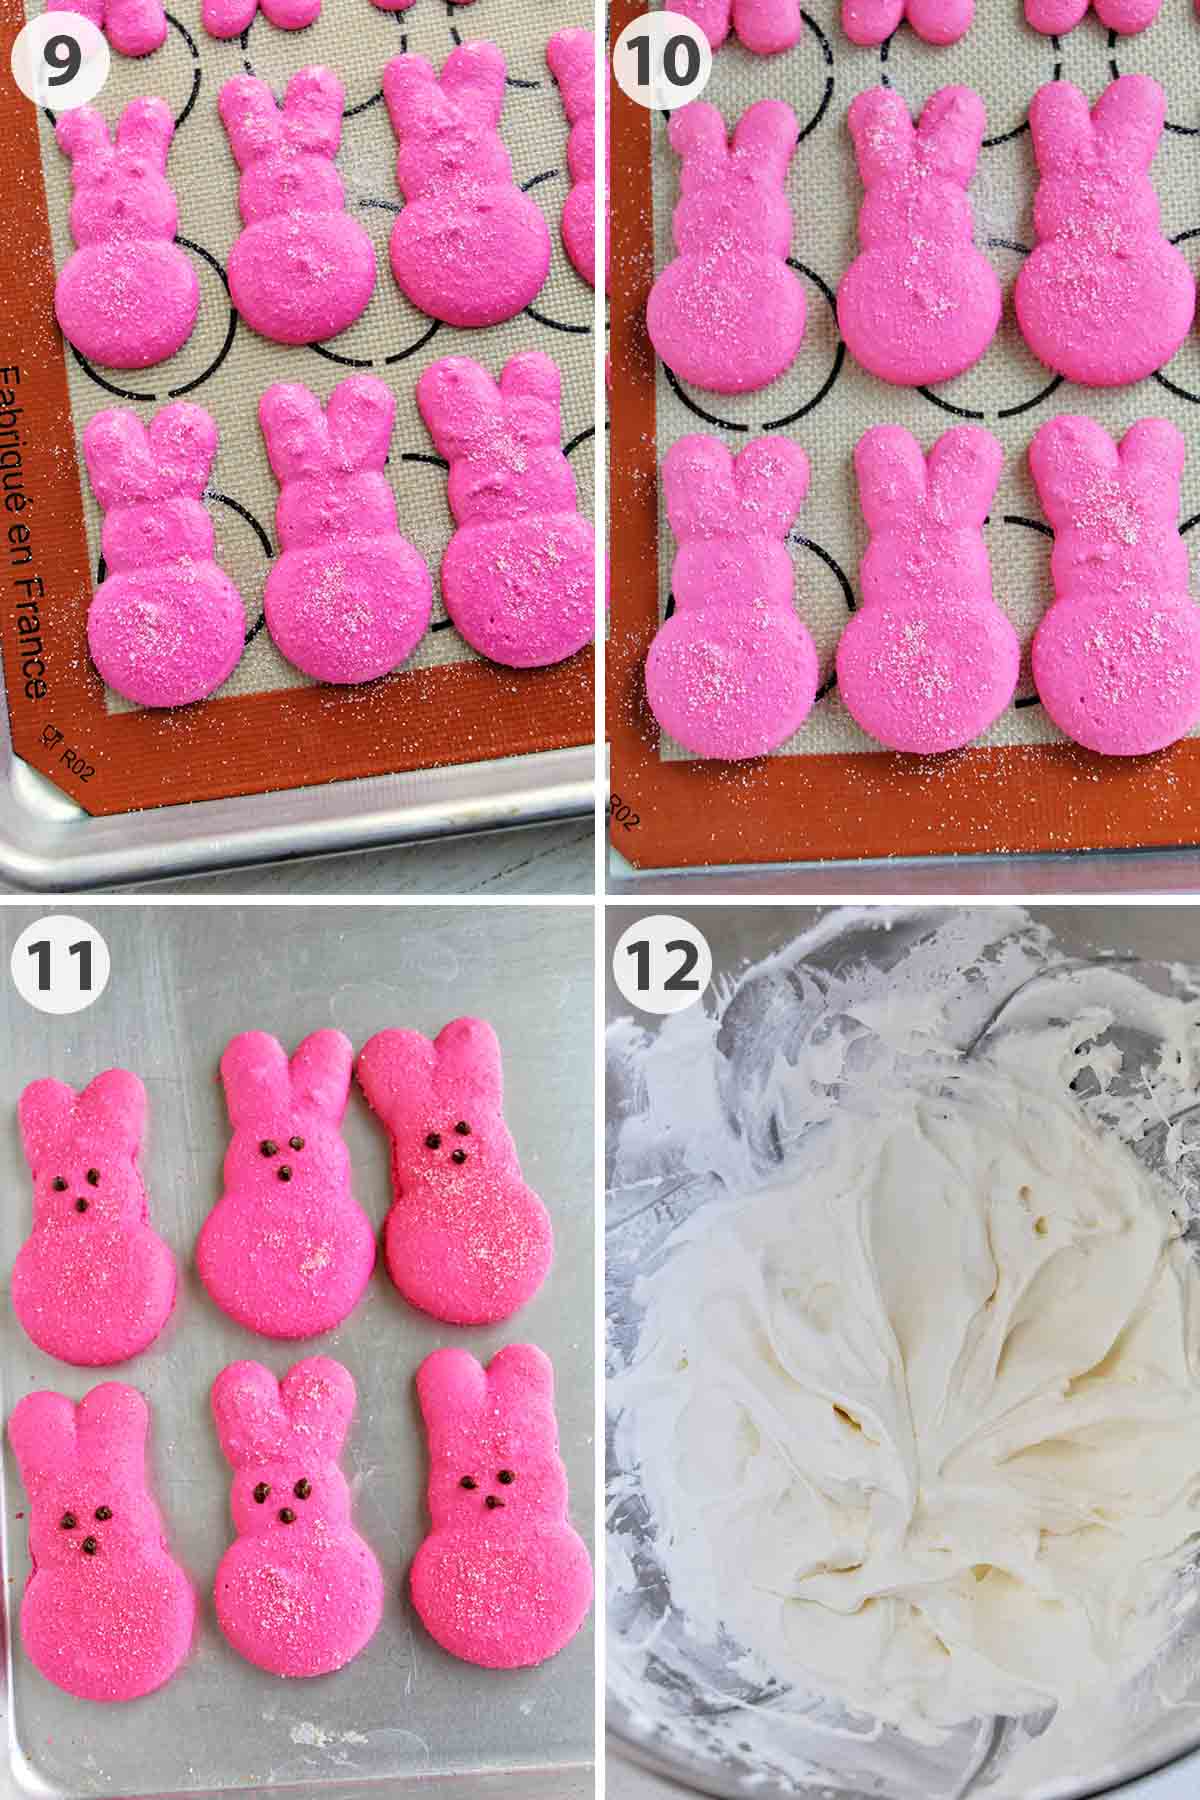 four numbered photos showing how to bake and decorate bunny Peeps macarons.